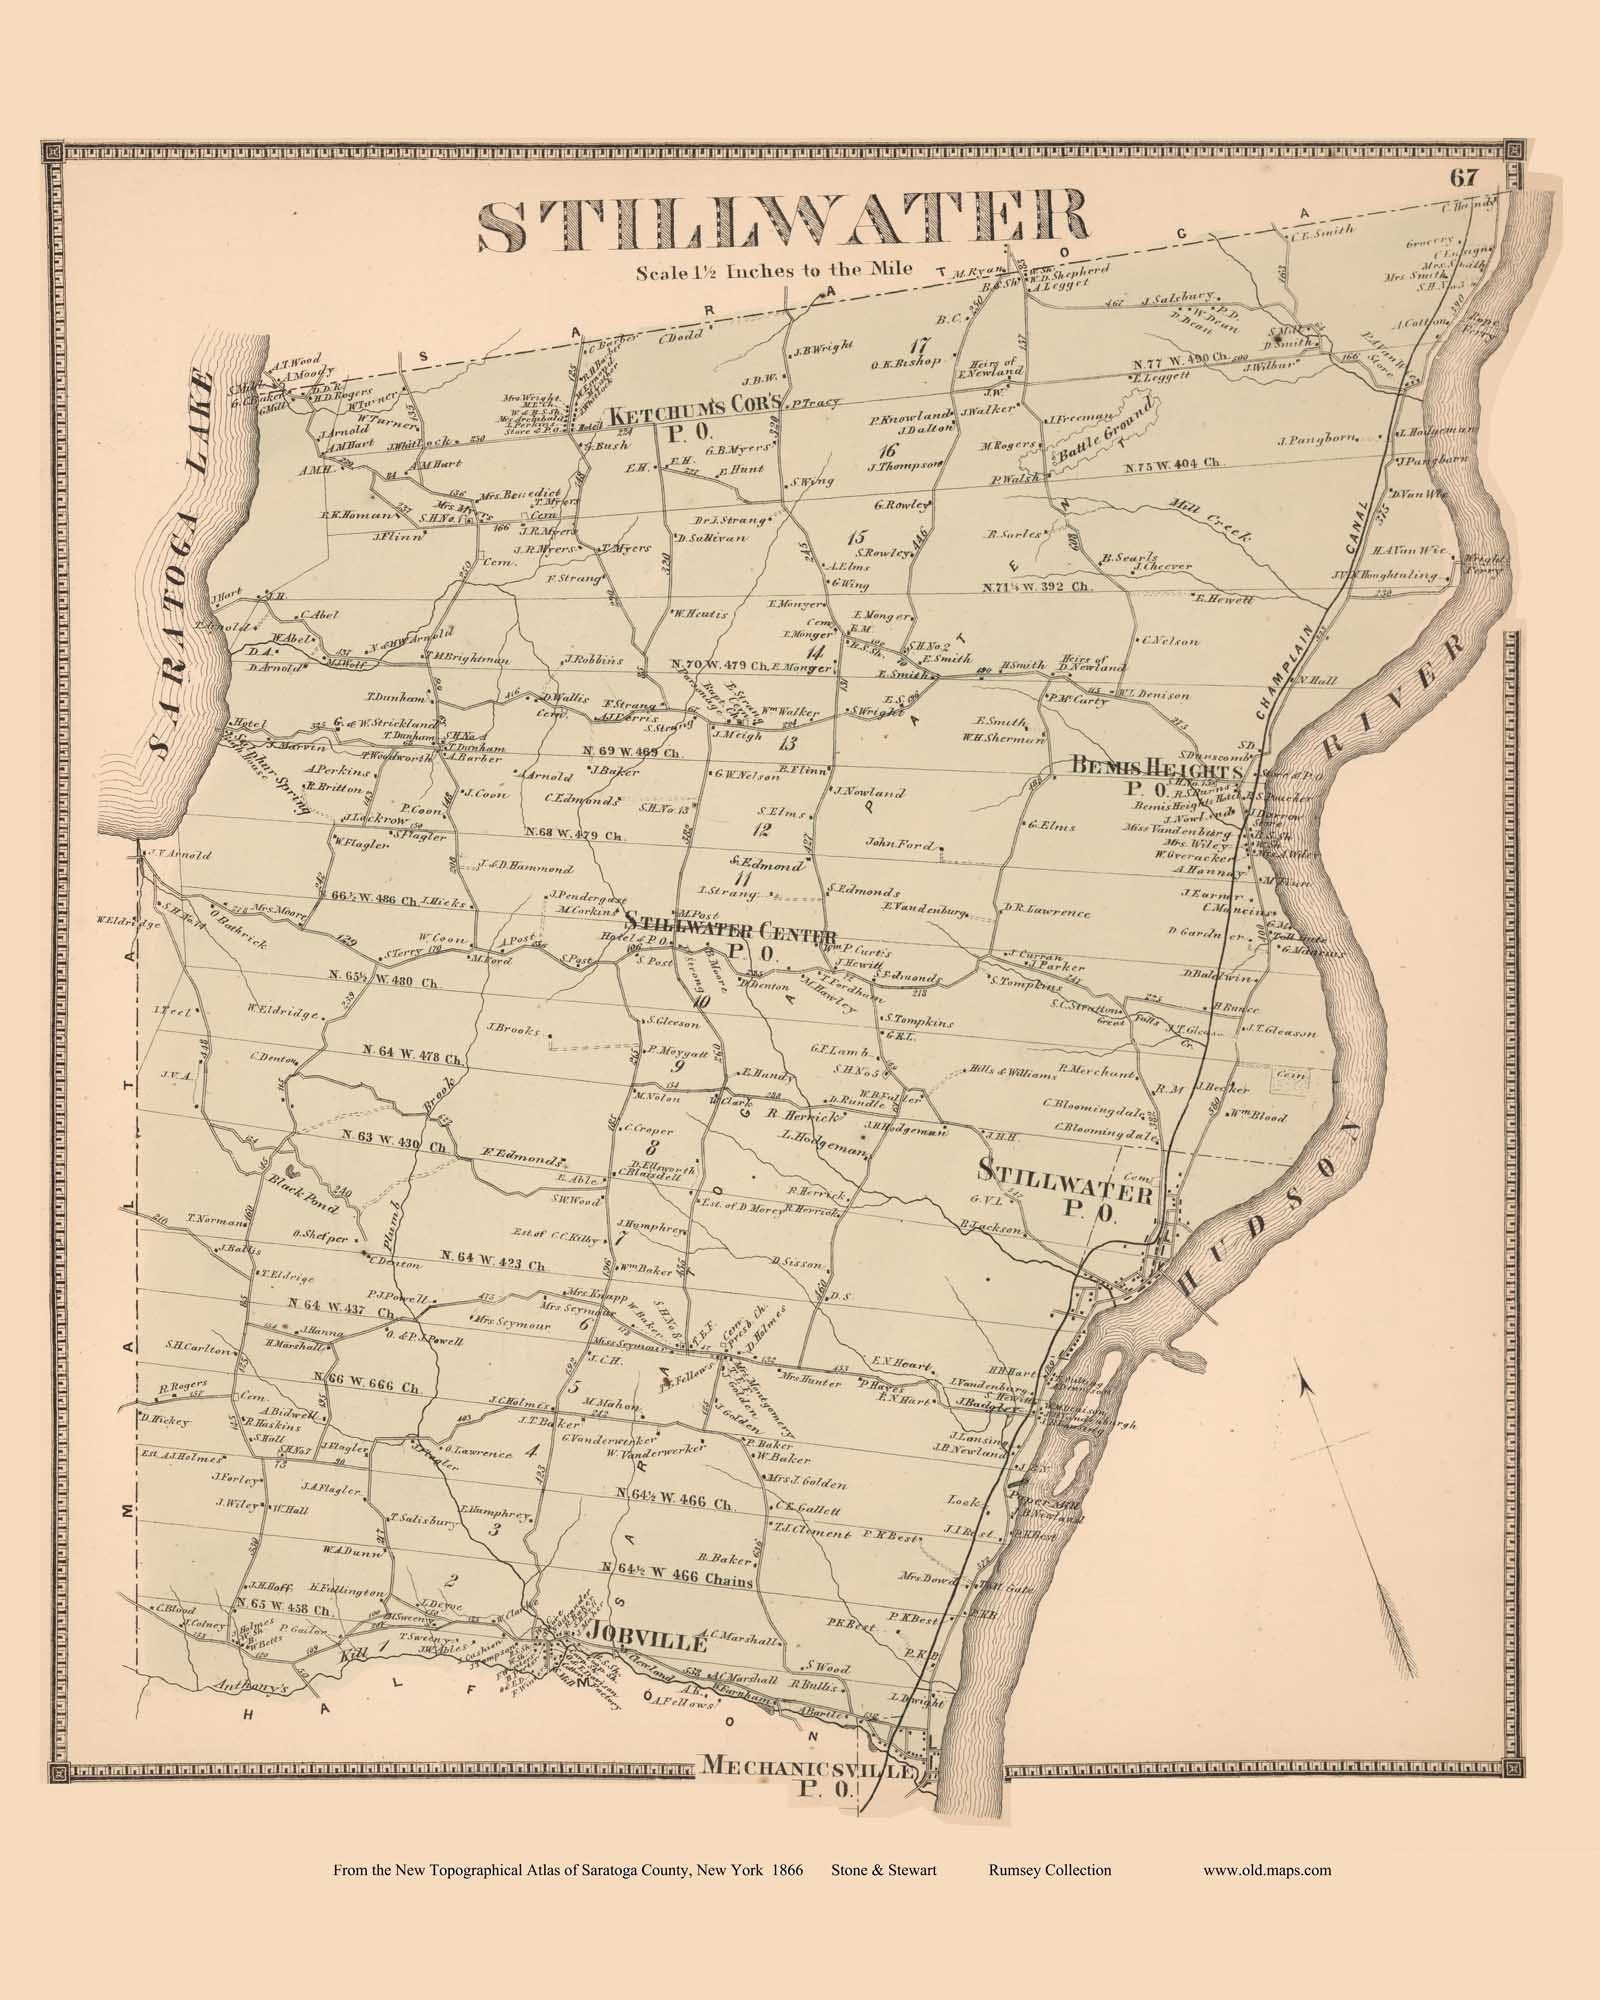 Stillwater 1866 Old Town Map Reprint Saratoga County pic